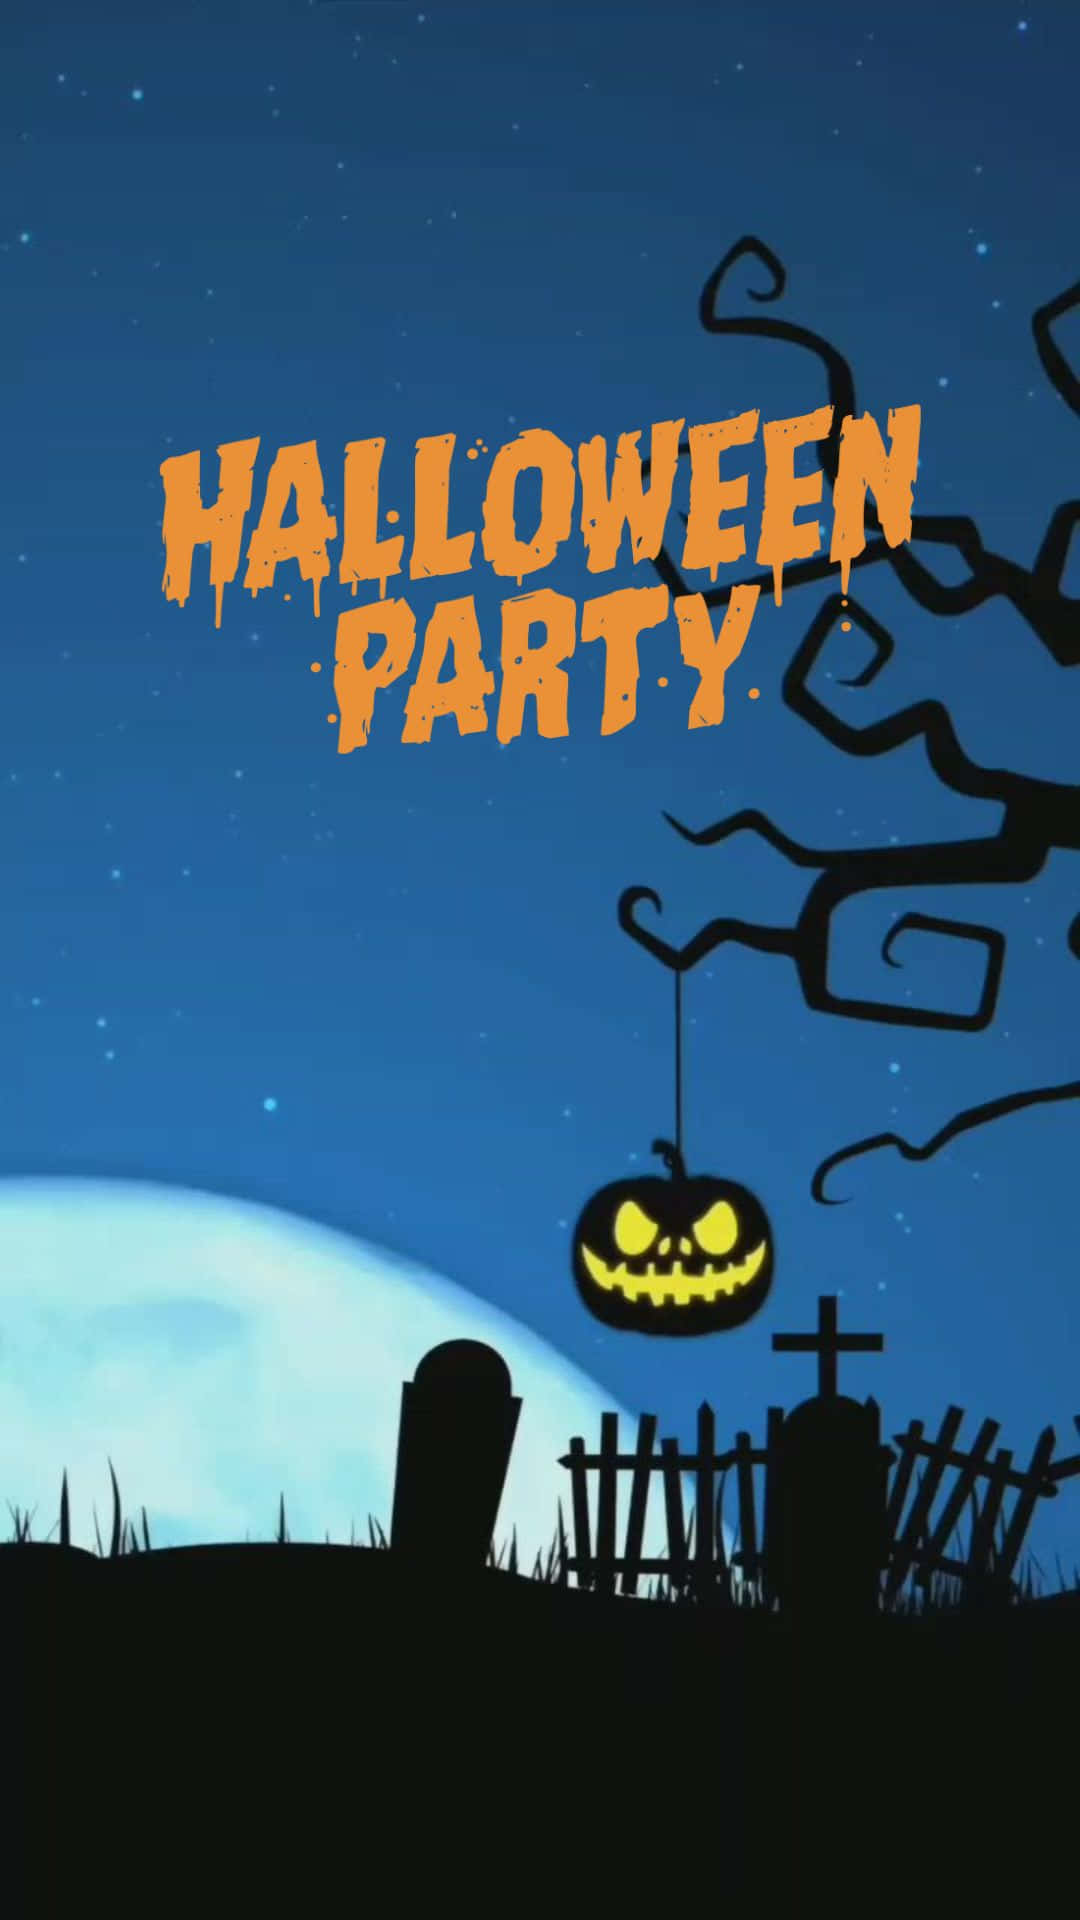 Join us for a spooky Halloween Party!